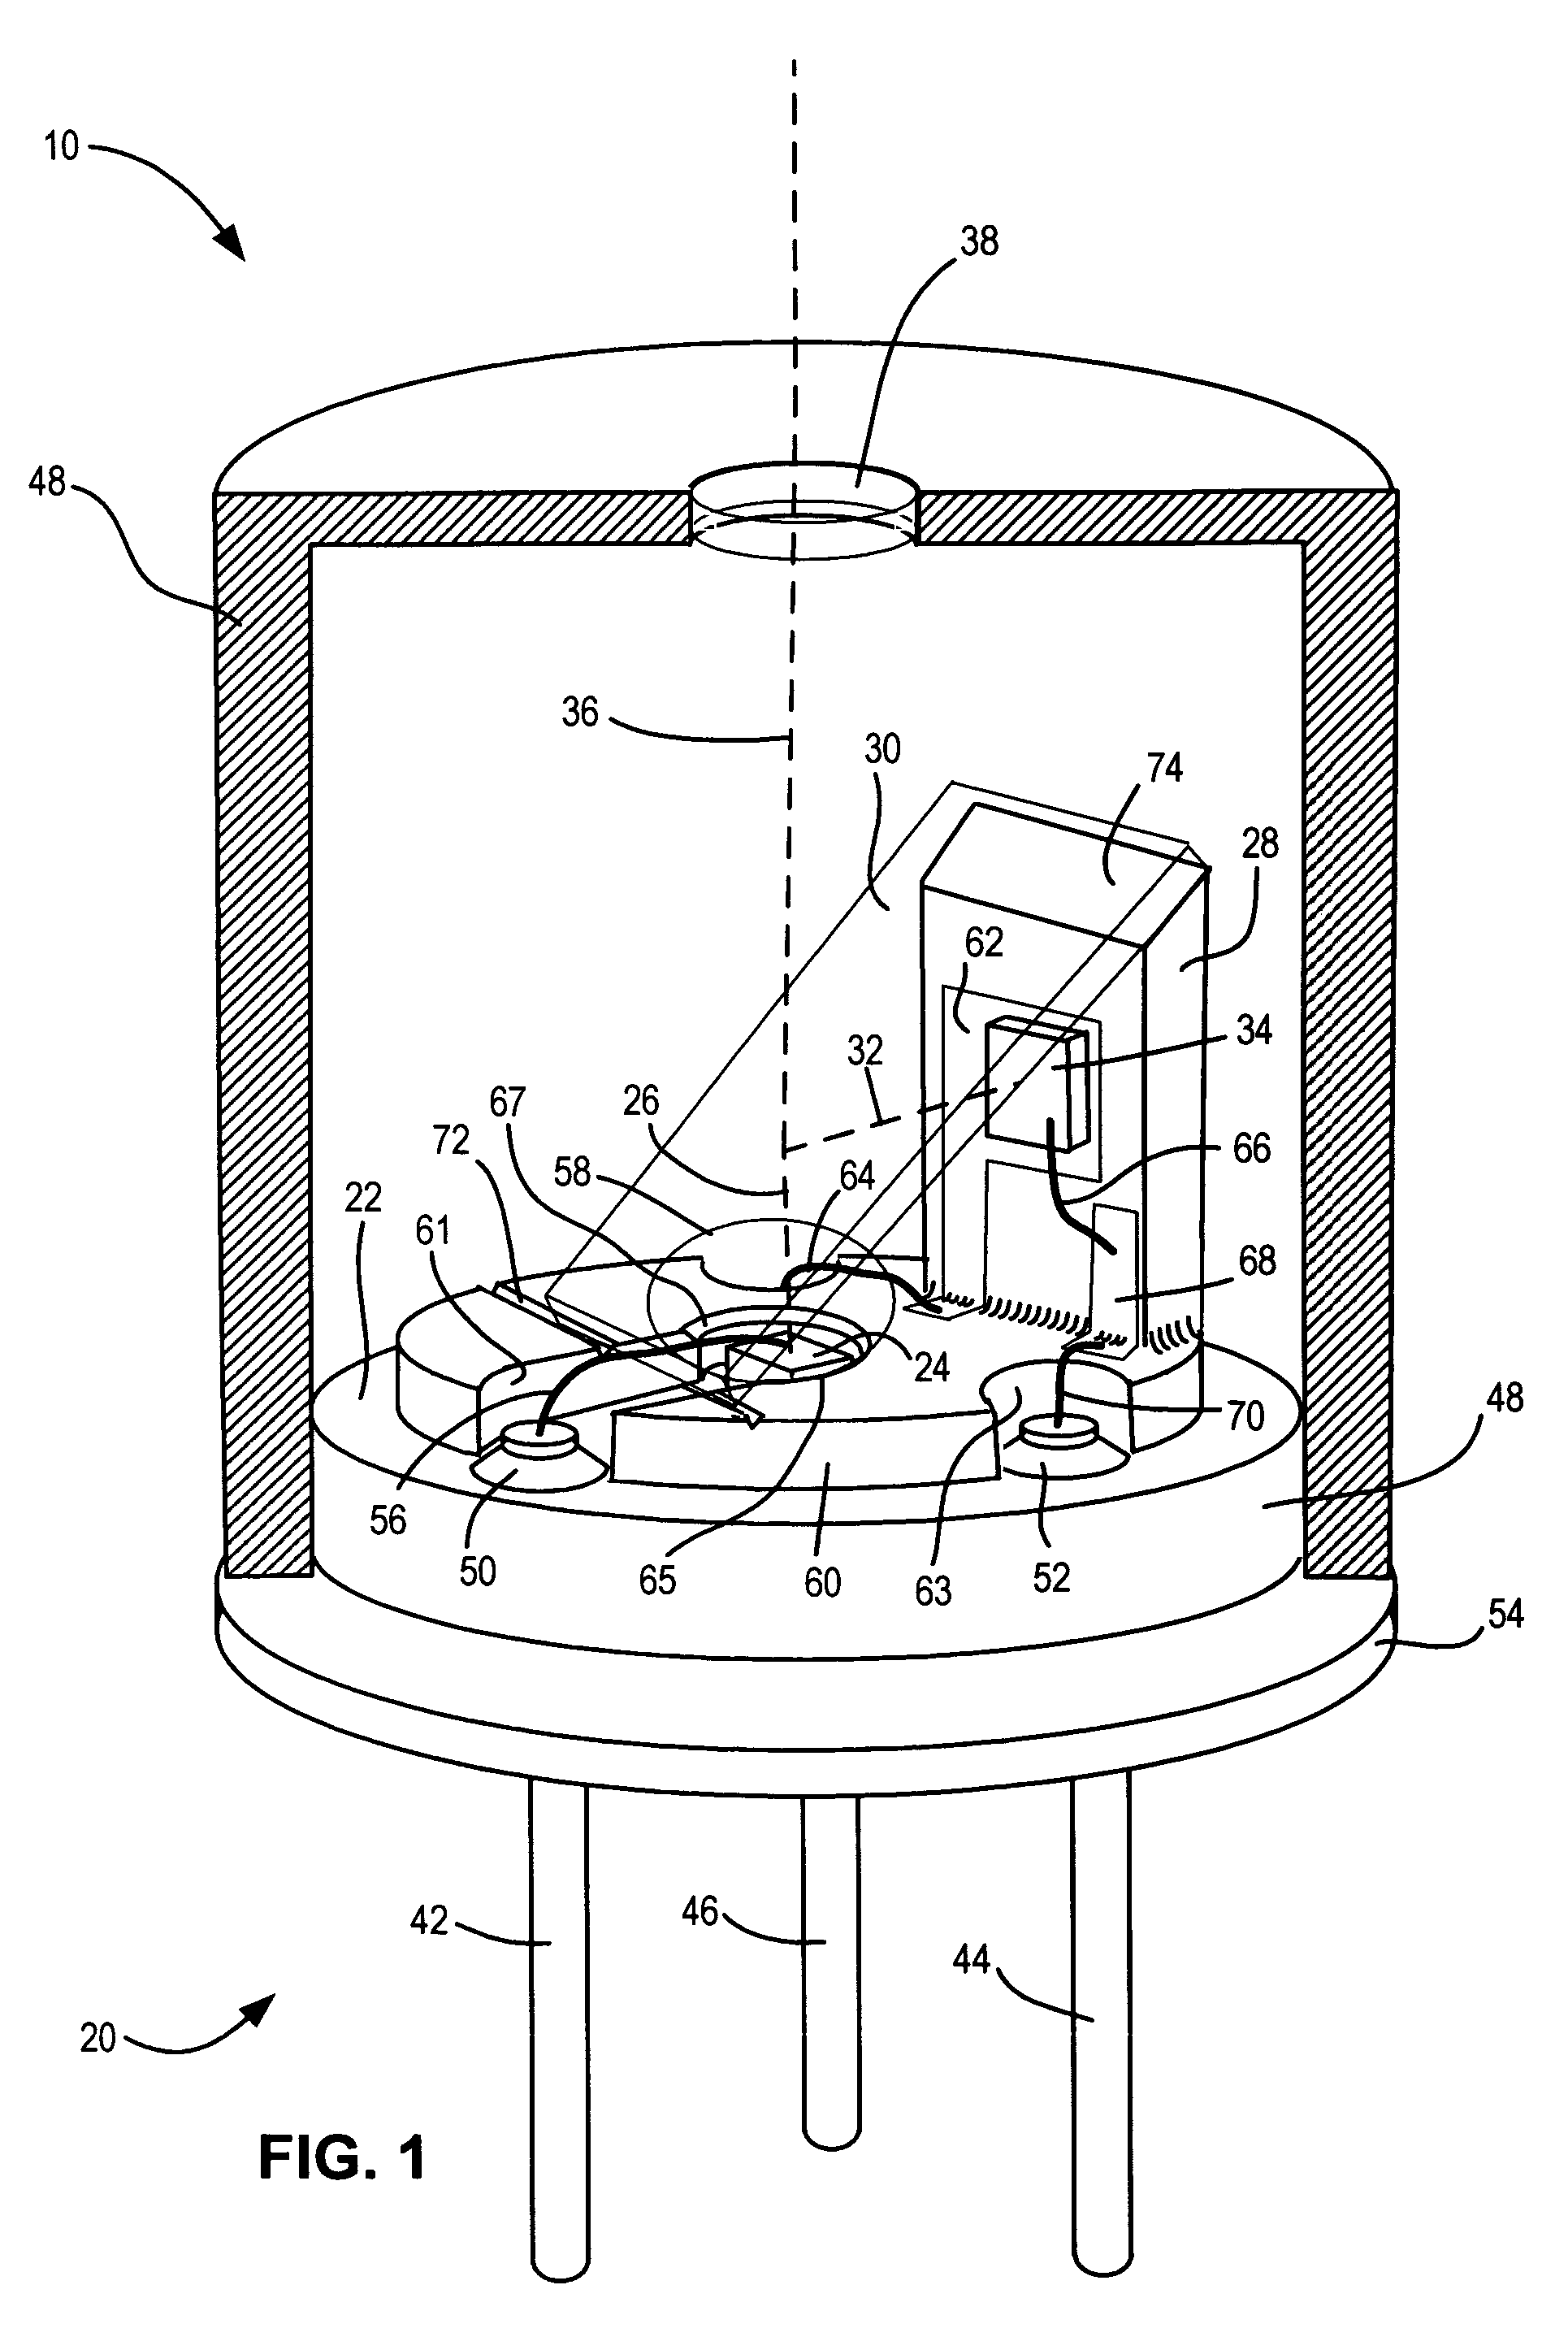 Semiconductor light source with optical feedback